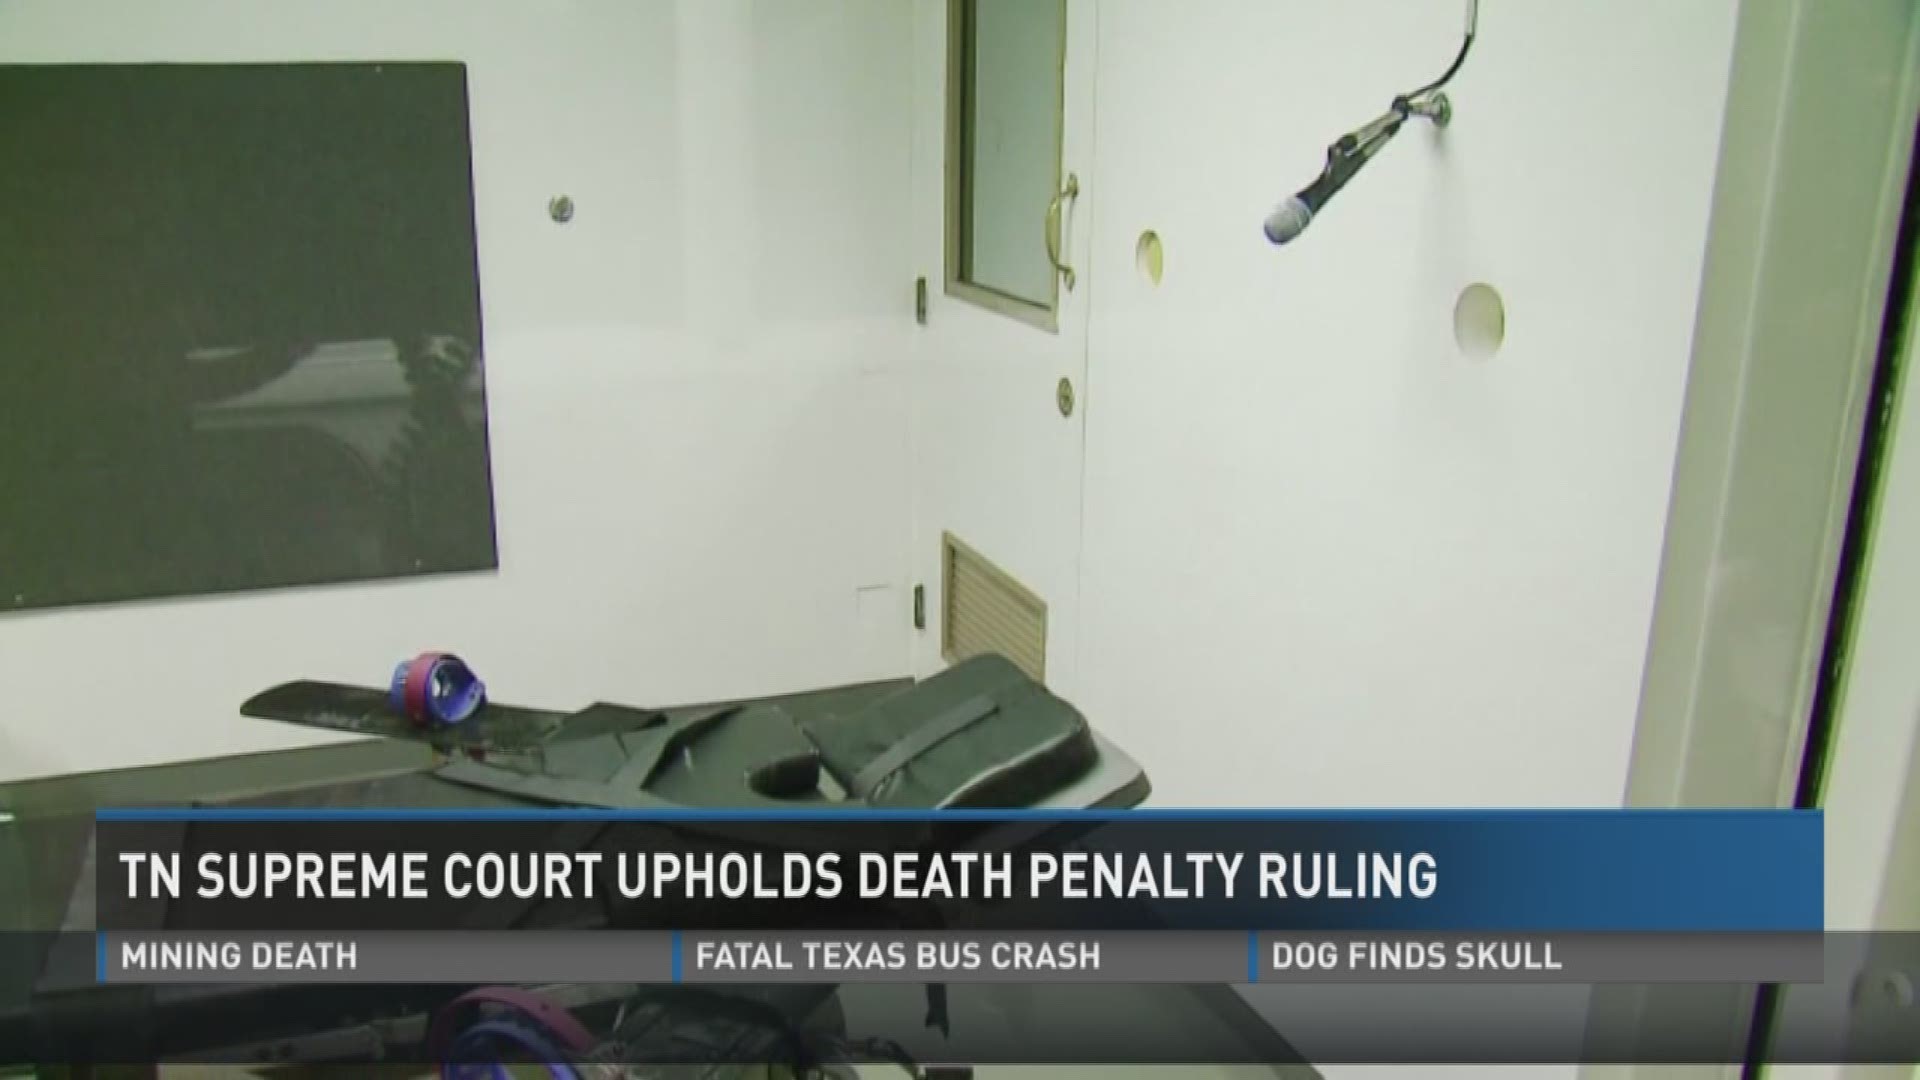 A Tennessee supreme court ruling could clear the way for executions to resume in Tennessee. Inmates claim it constitutes cruel and unusual punishment.